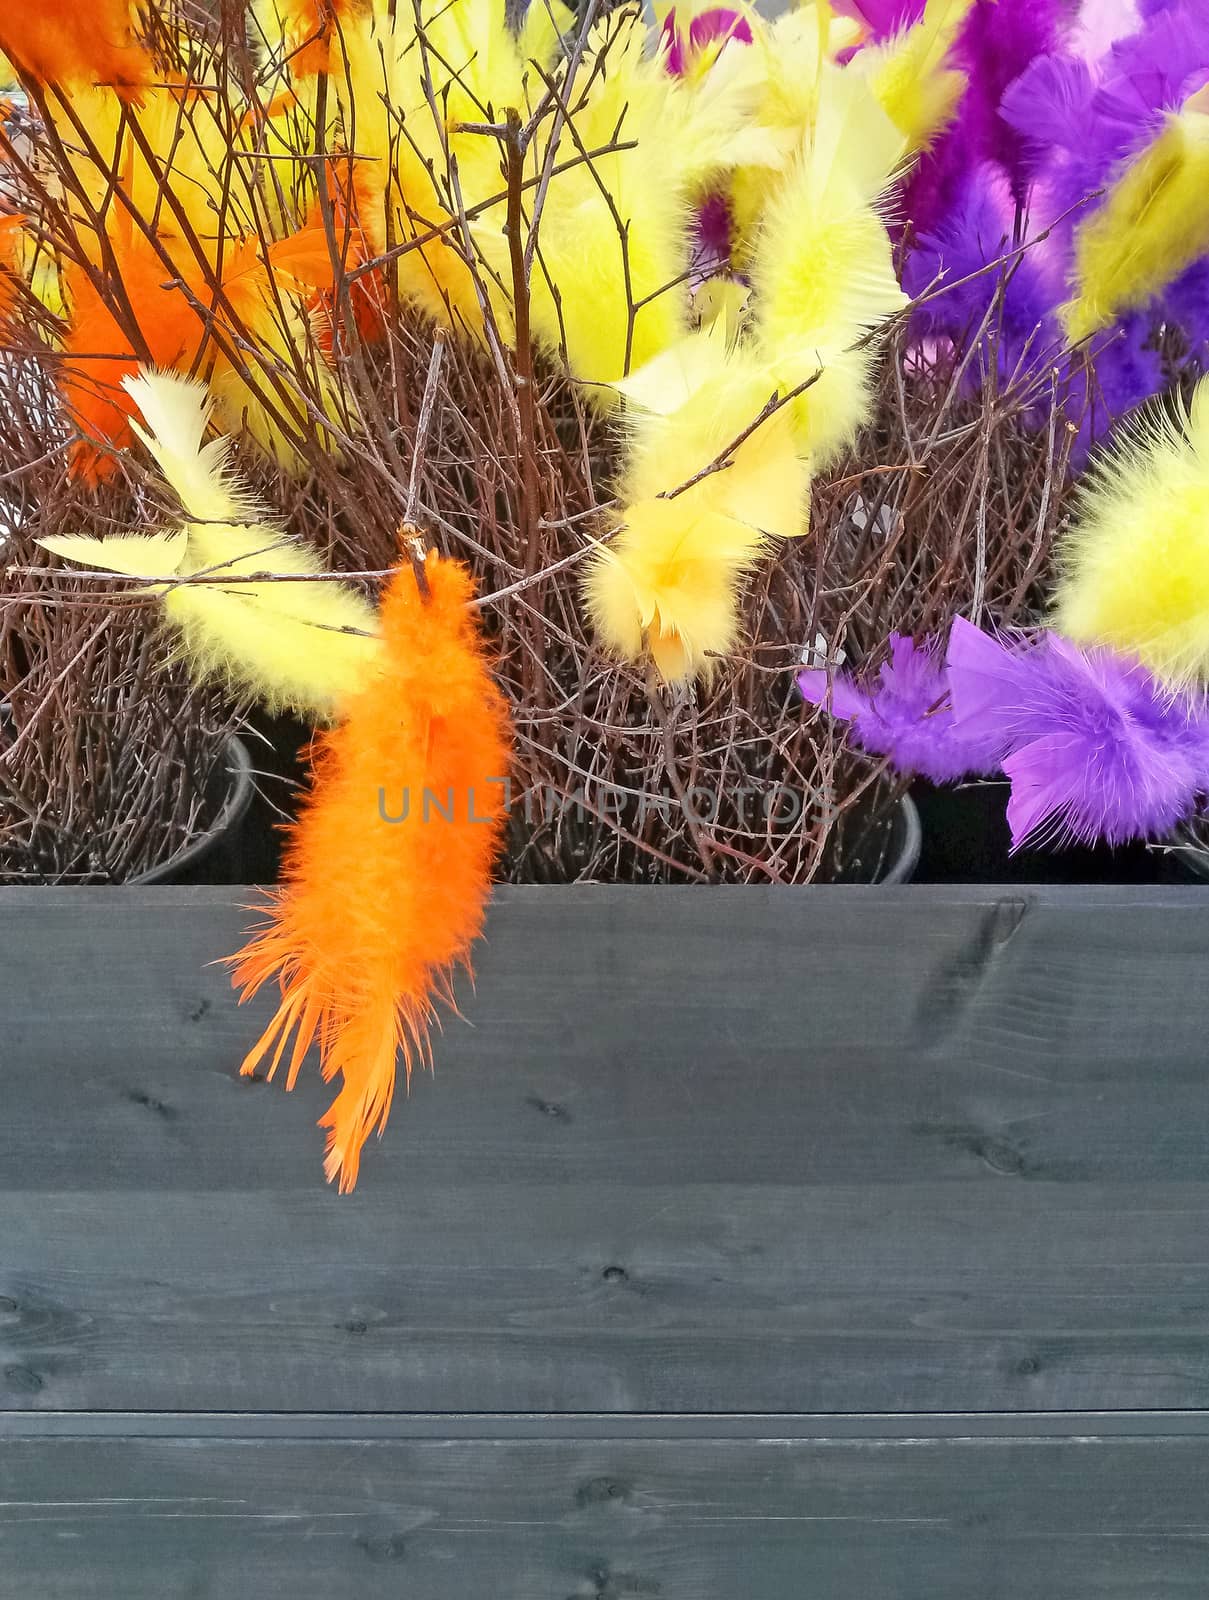 Birch branches decorated with colorful feathers for Easter by anikasalsera